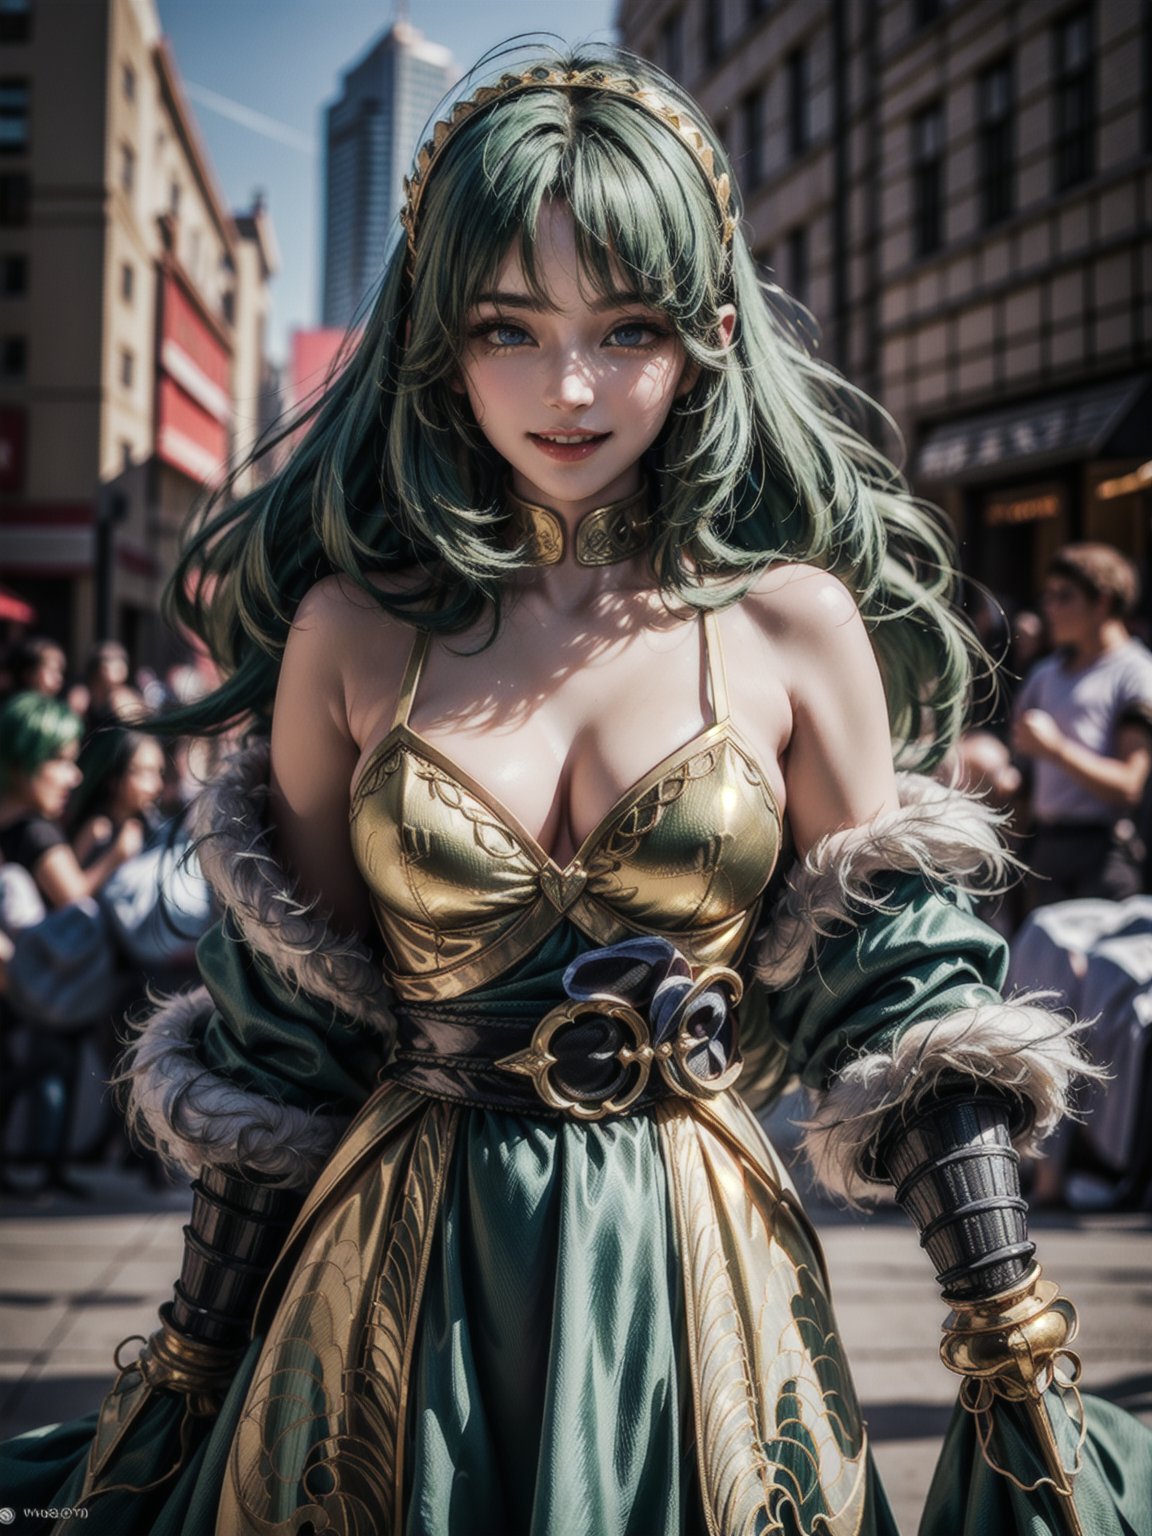 {((1woman))}, {only she is (((black modern medieval armor with small golden parts extremely small and tight on the body, medieval sword in the sheath fastened at the waist)), only she has ((giant breasts)), (((very short green hair, blue eyes)), ((staring at the viewer, smiling, expression of desire)), ((fighting pose)}, {((in city of King Arthur's time, with multiple people,  product sales fair))}, ((whole body):1.5), 16k, best quality, best resolution, best sharpness,